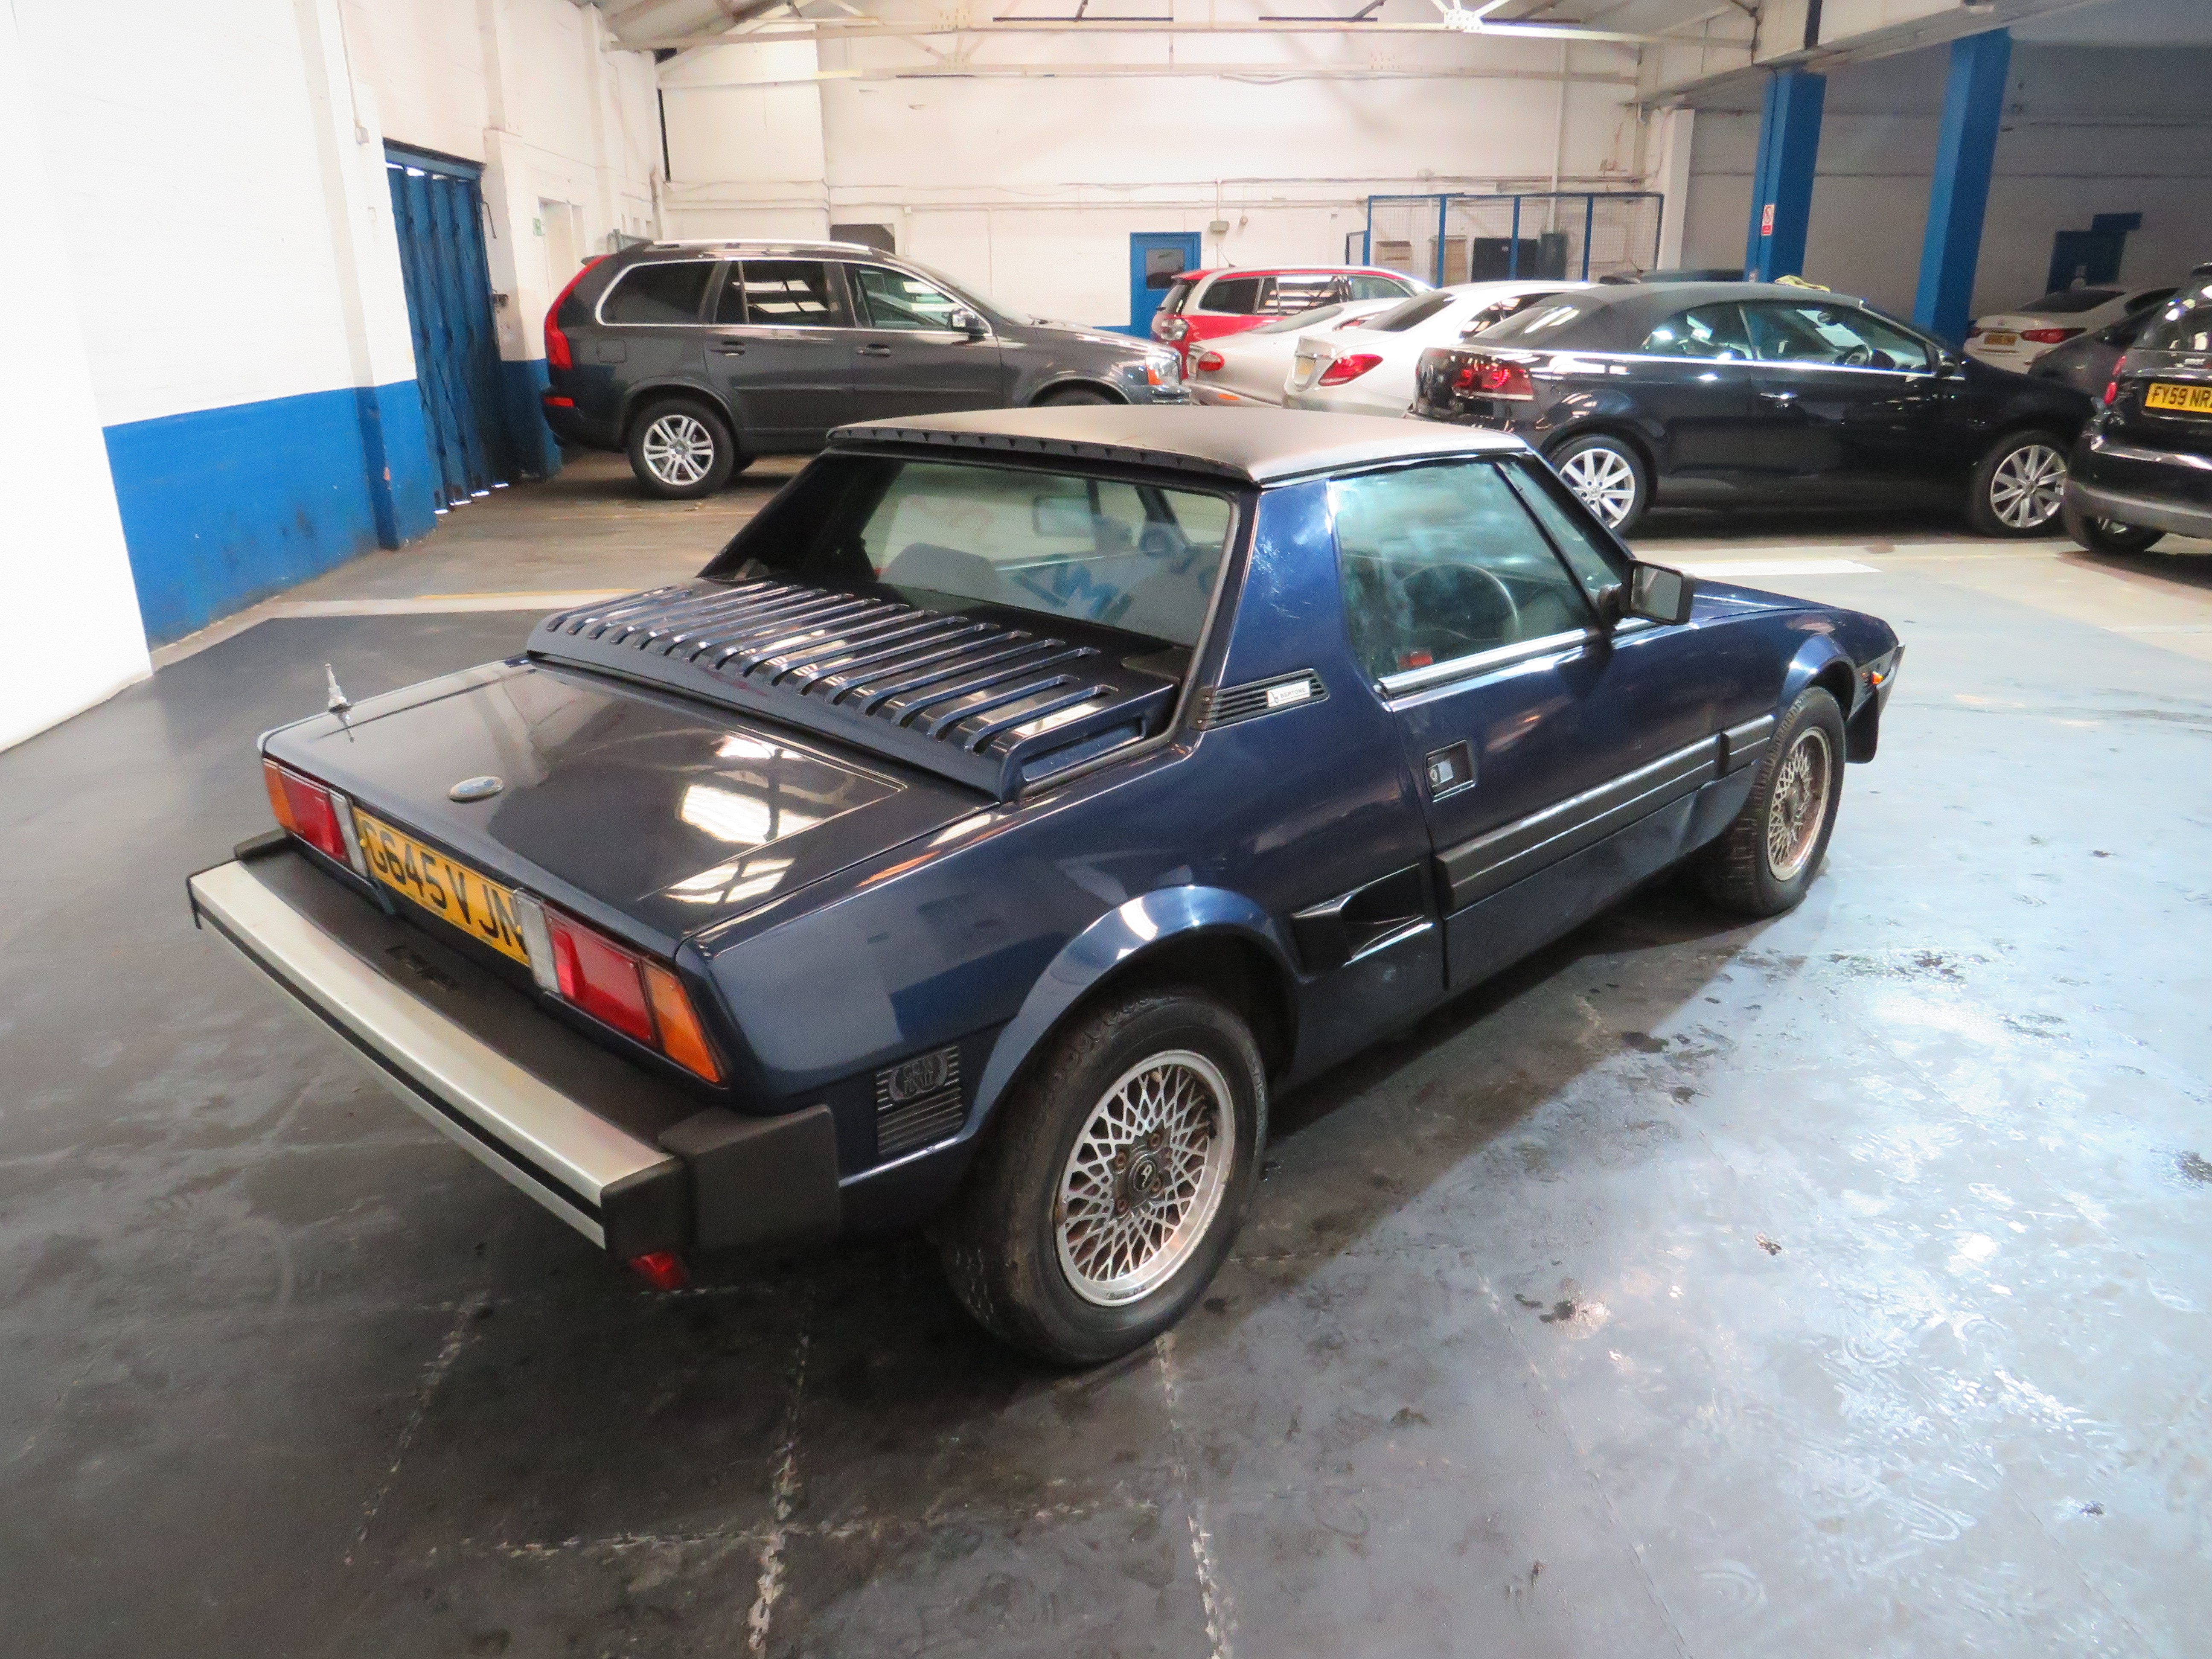 1989 Fiat X1/9 Gran Finale - 1498cc - ONE OWNER FROM NEW - Image 12 of 38